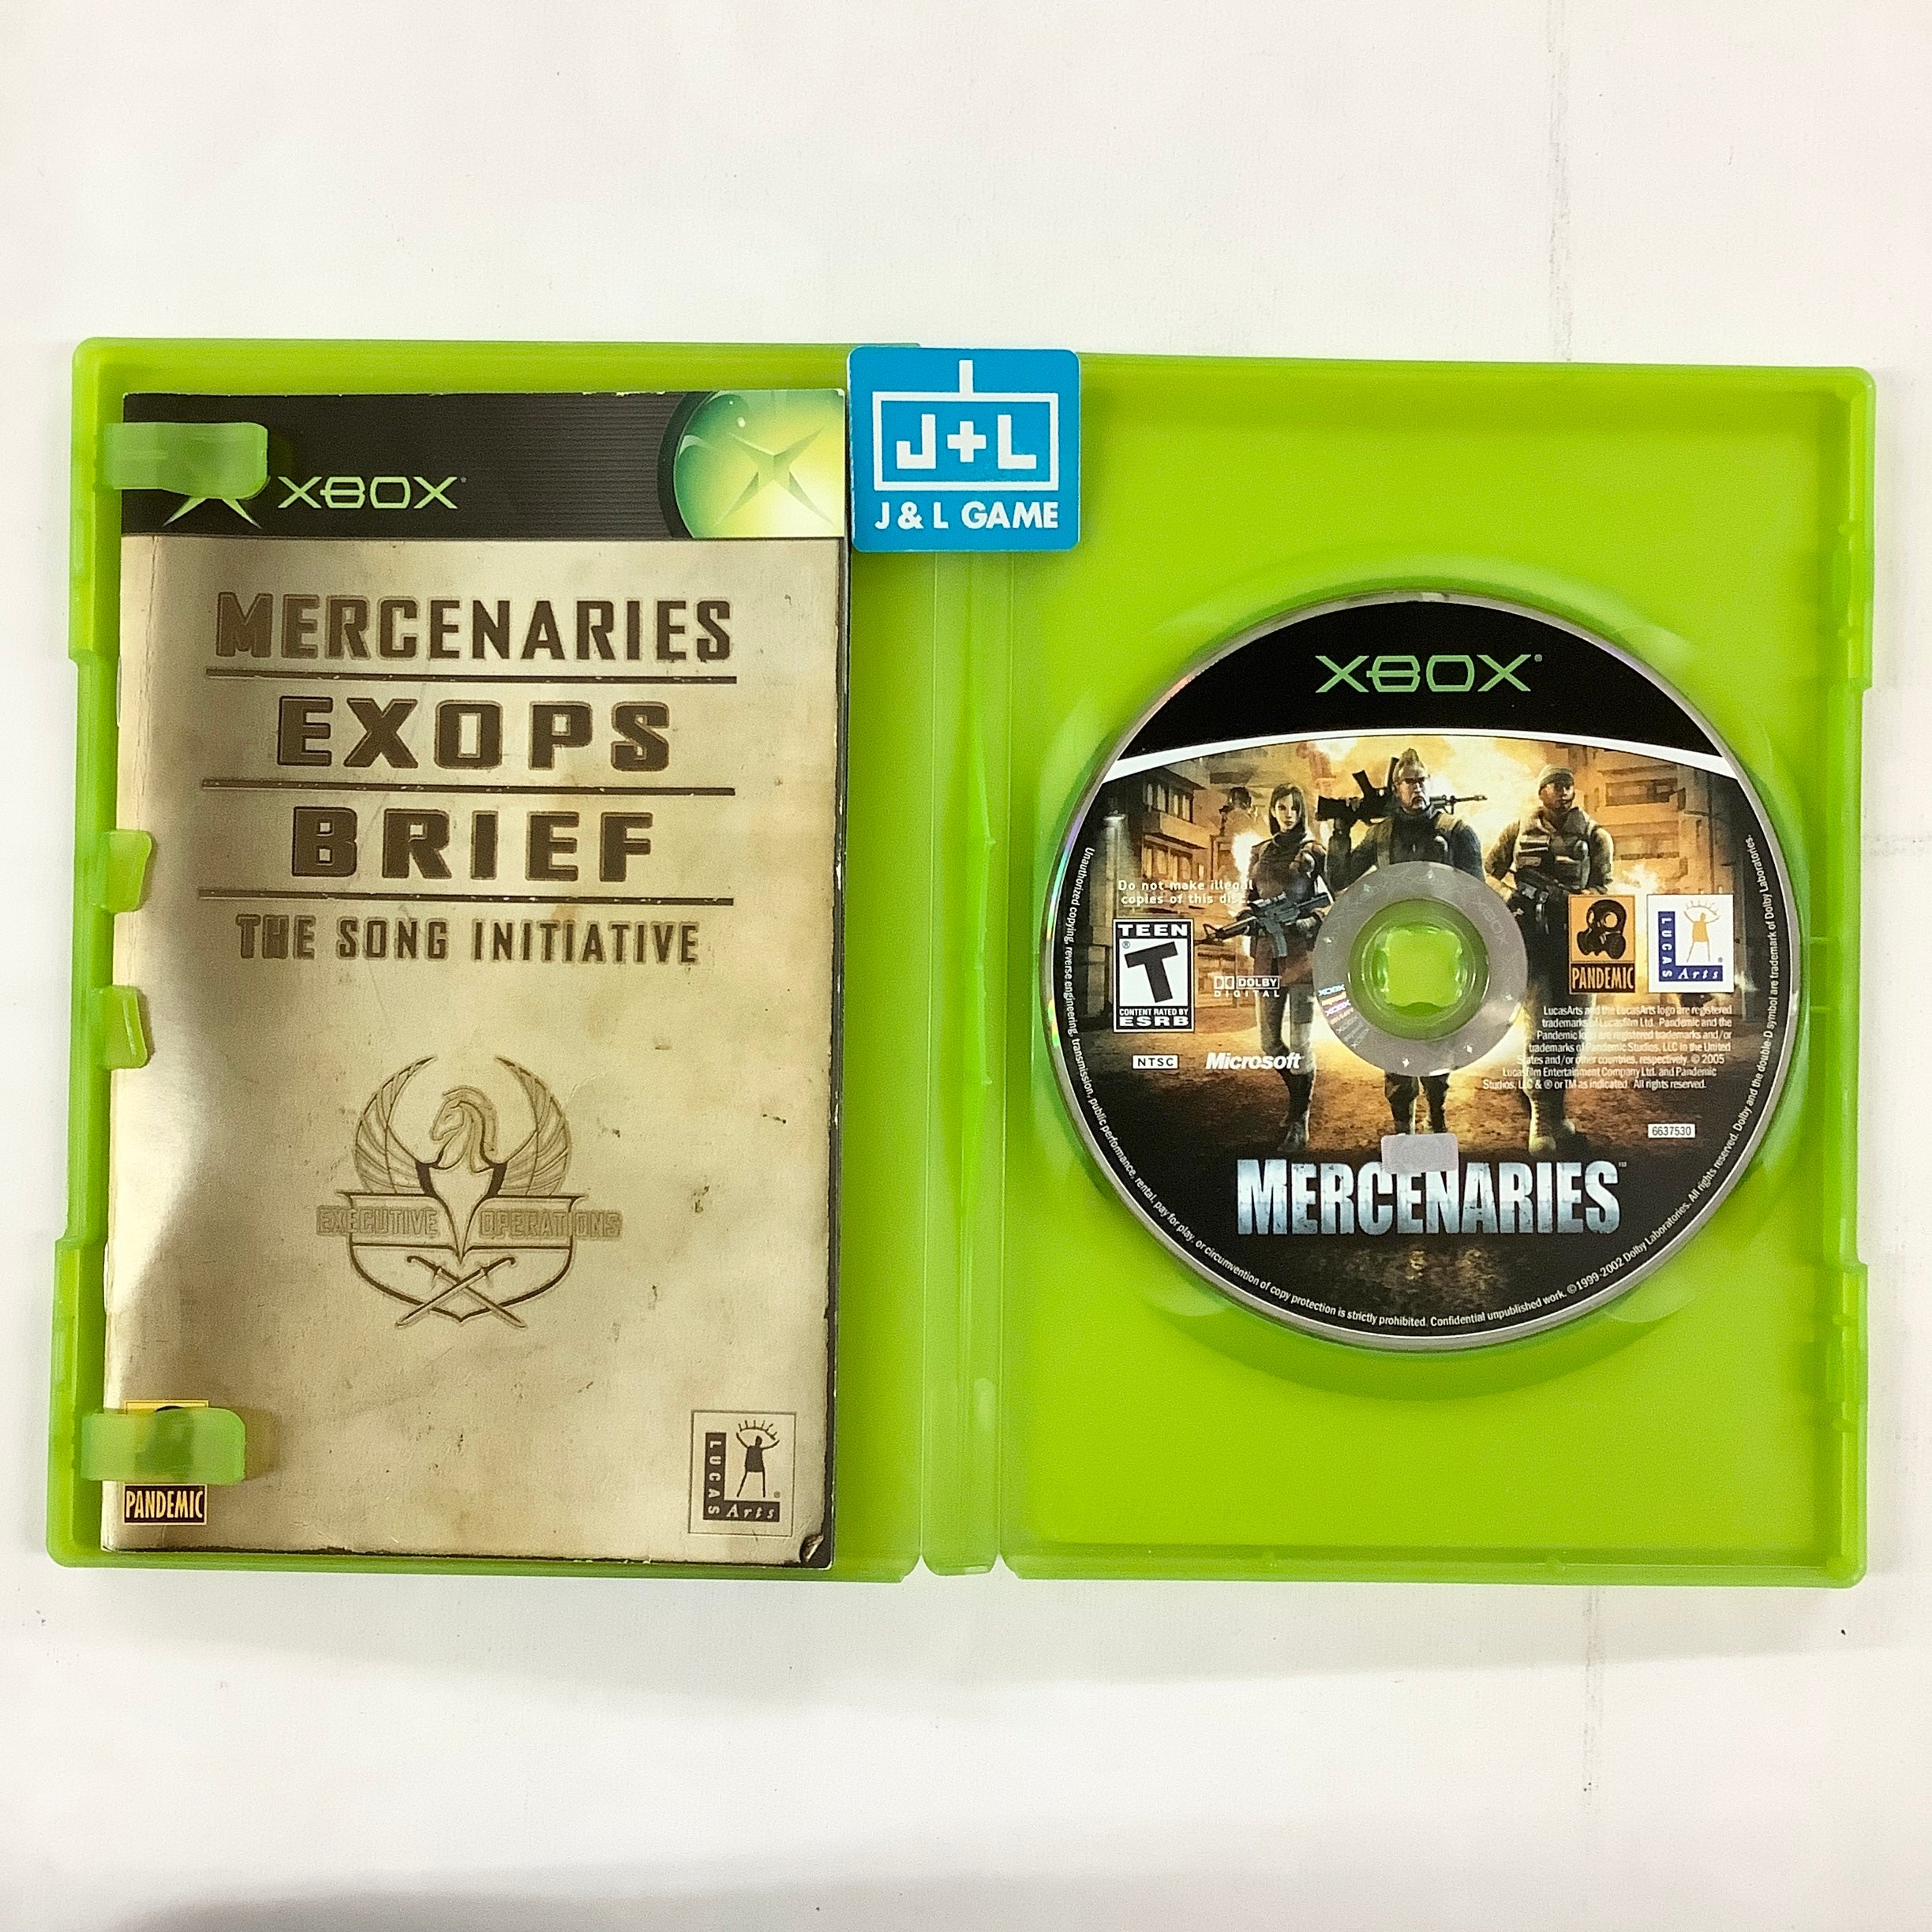 Mercenaries: Playground of Destruction - (XB) Xbox [Pre-Owned] Video Games LucasArts   